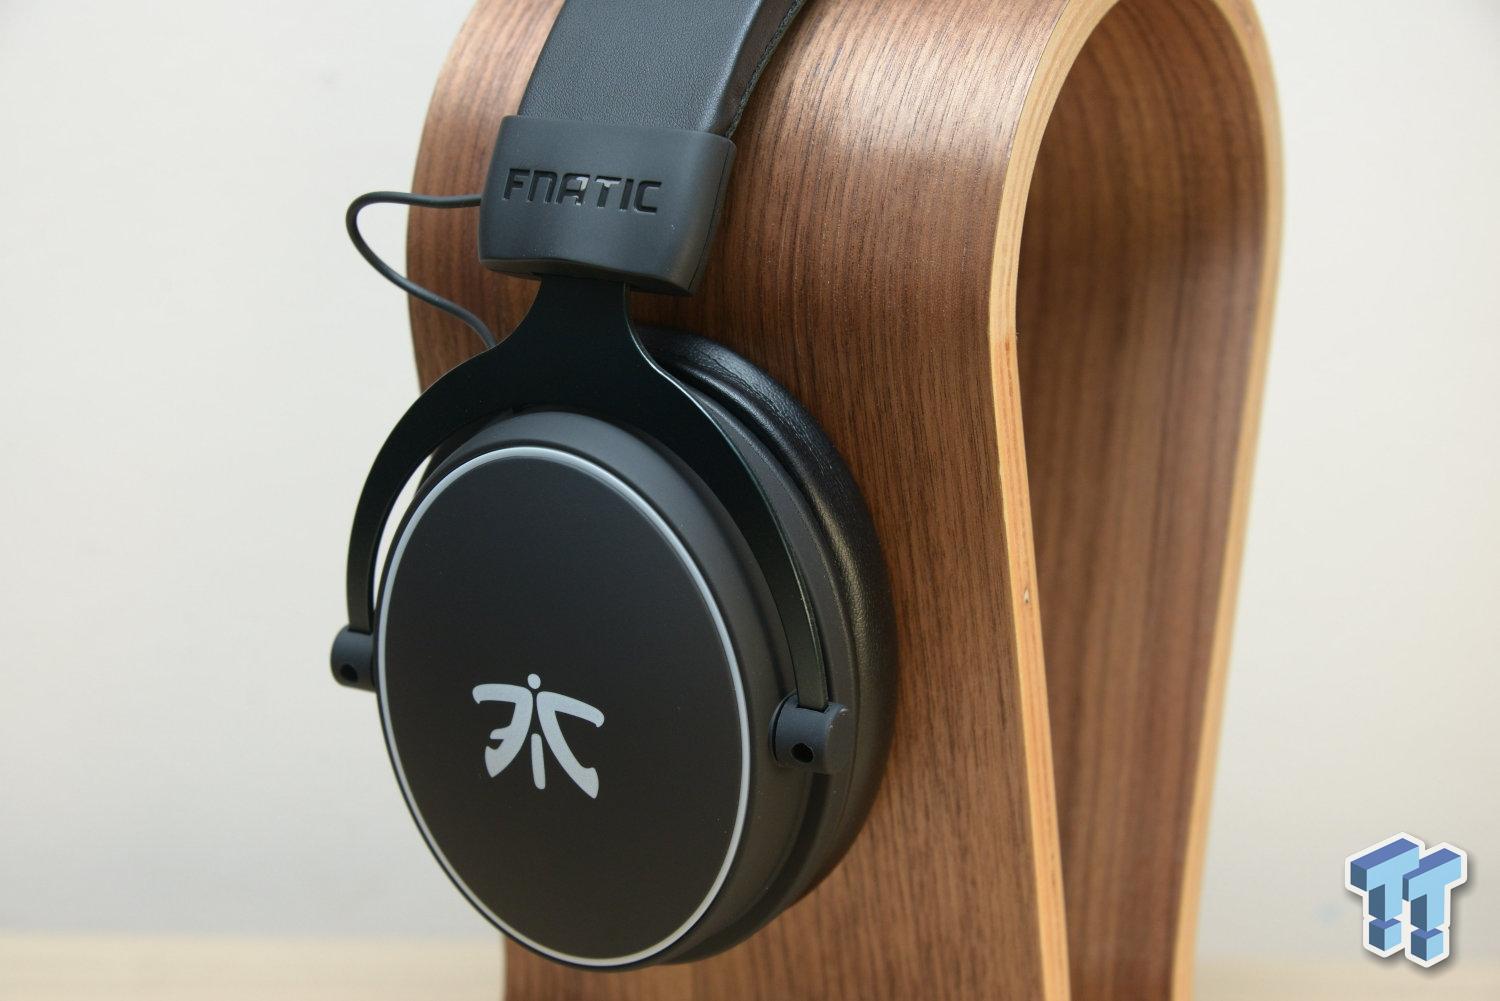 Fnatic React Gaming Headset Review - Closer Examination, Build Quality &  Comfort